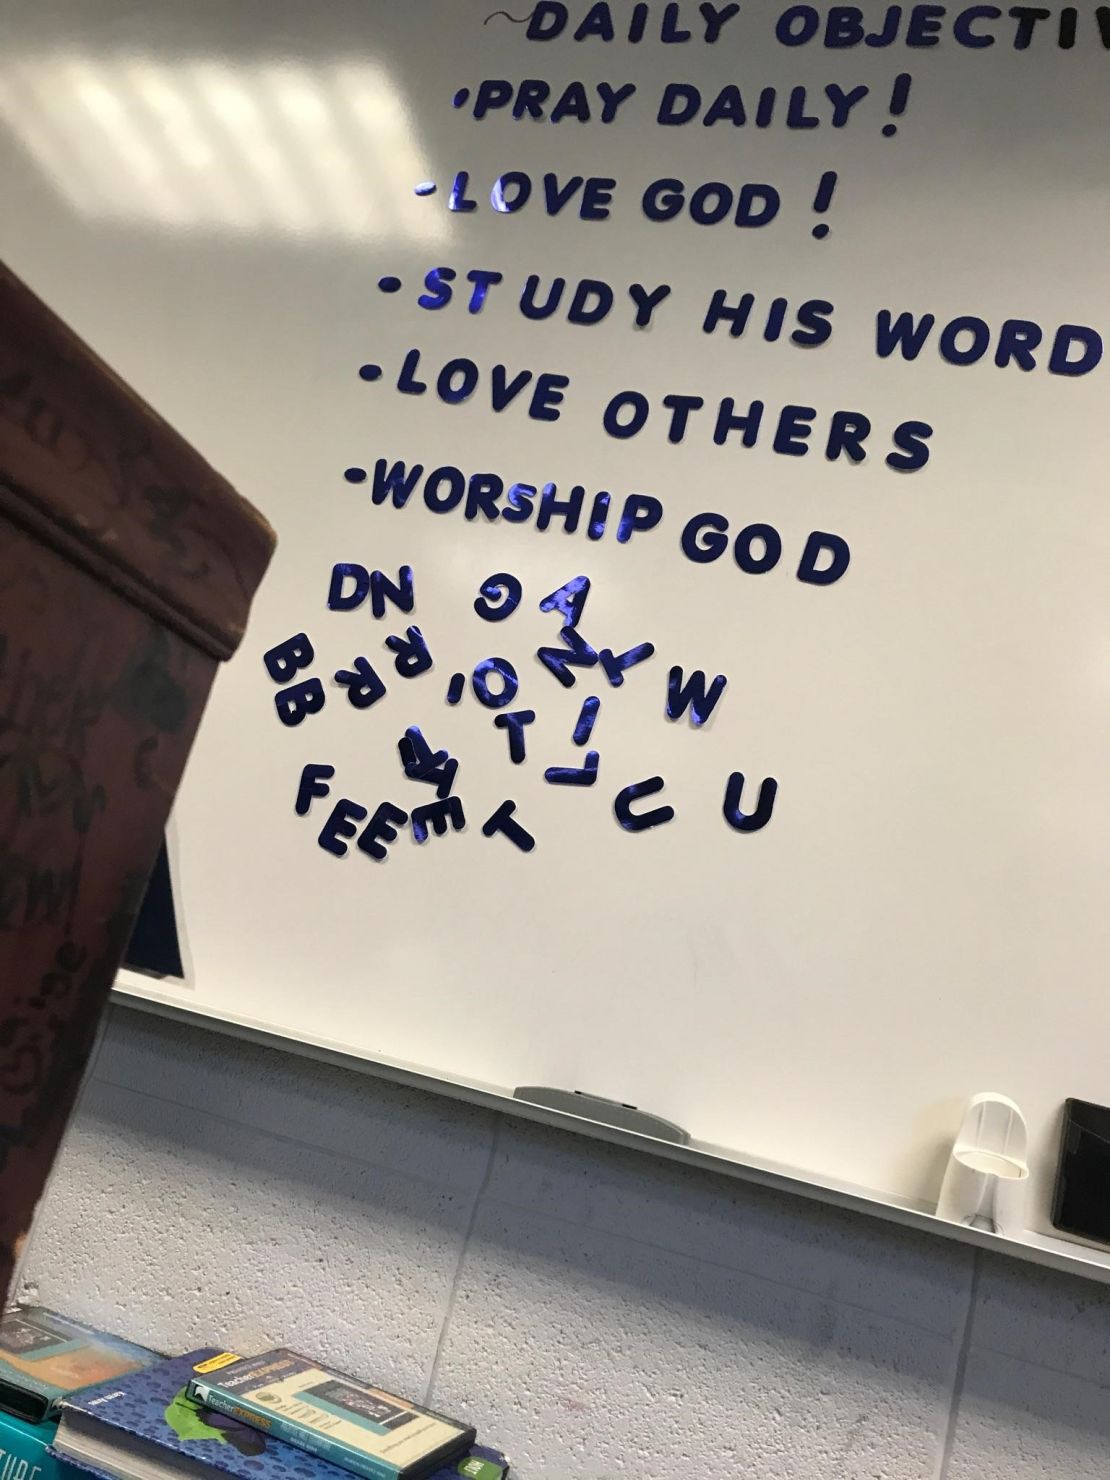 A teacher had these "daily objectives" on her wall, the lawsuit says.
